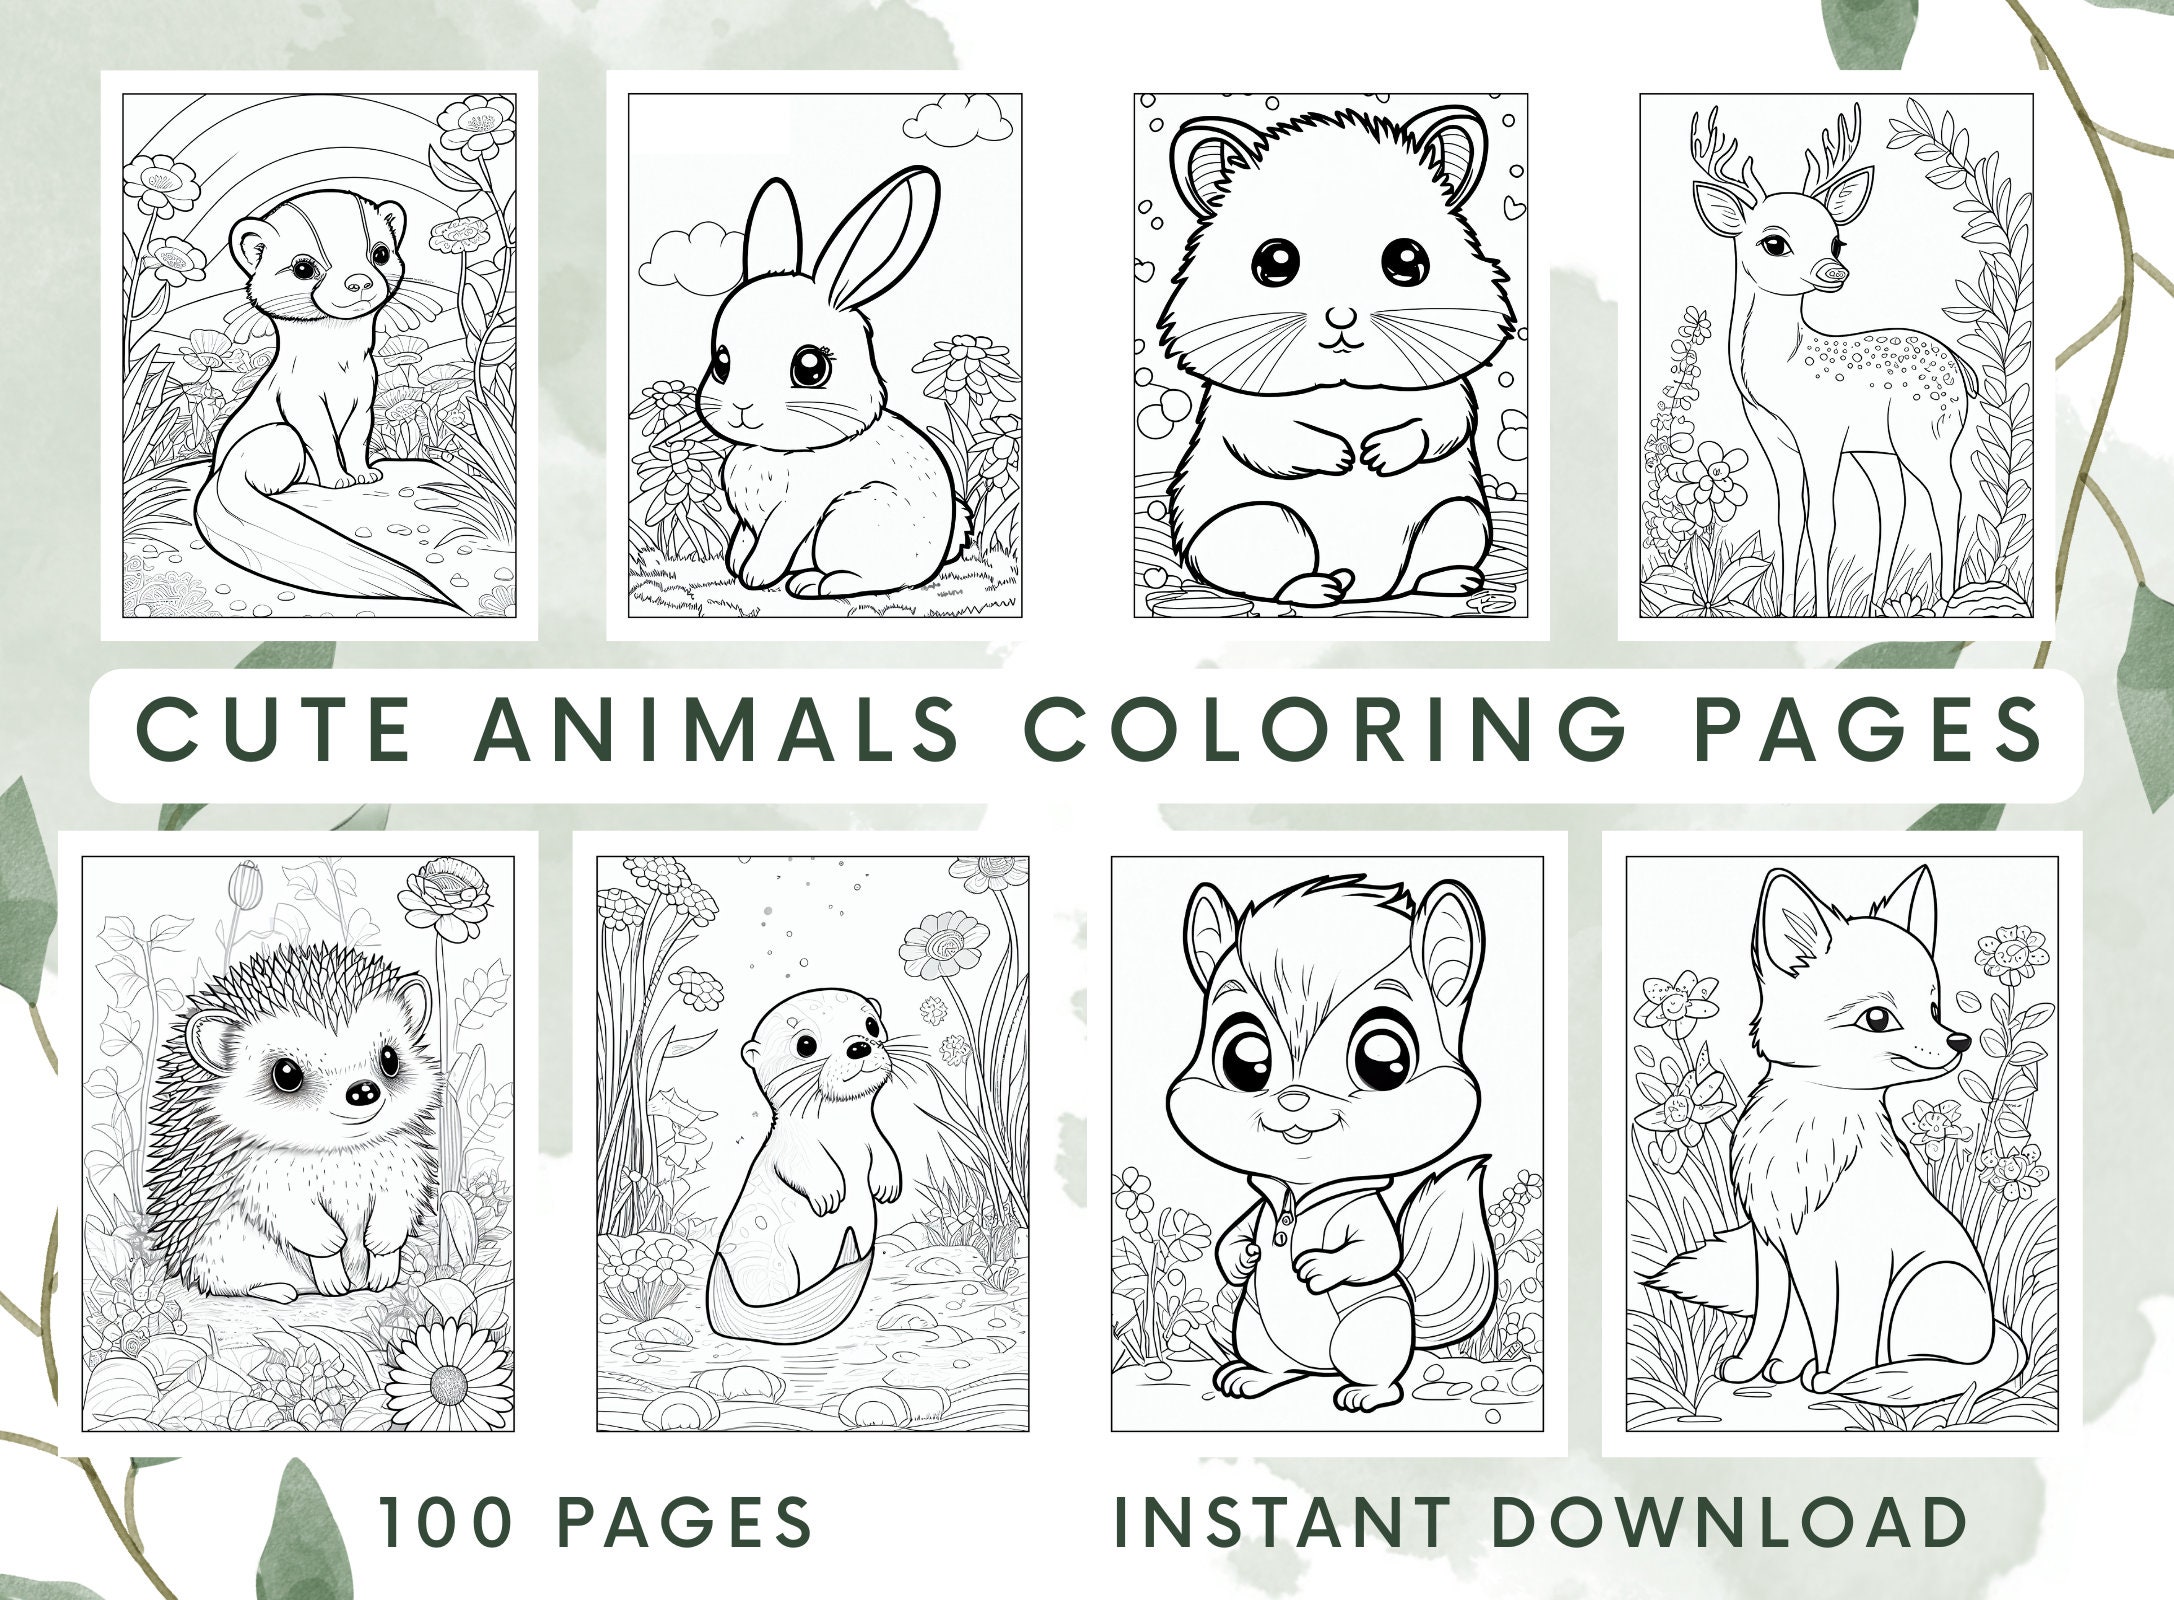 Coloring Book For Kids: Ages 4-8 Years - Fun And Easy Coloring Pages in  Cute Style With animals and many other cute figures.: Activity coloring  books